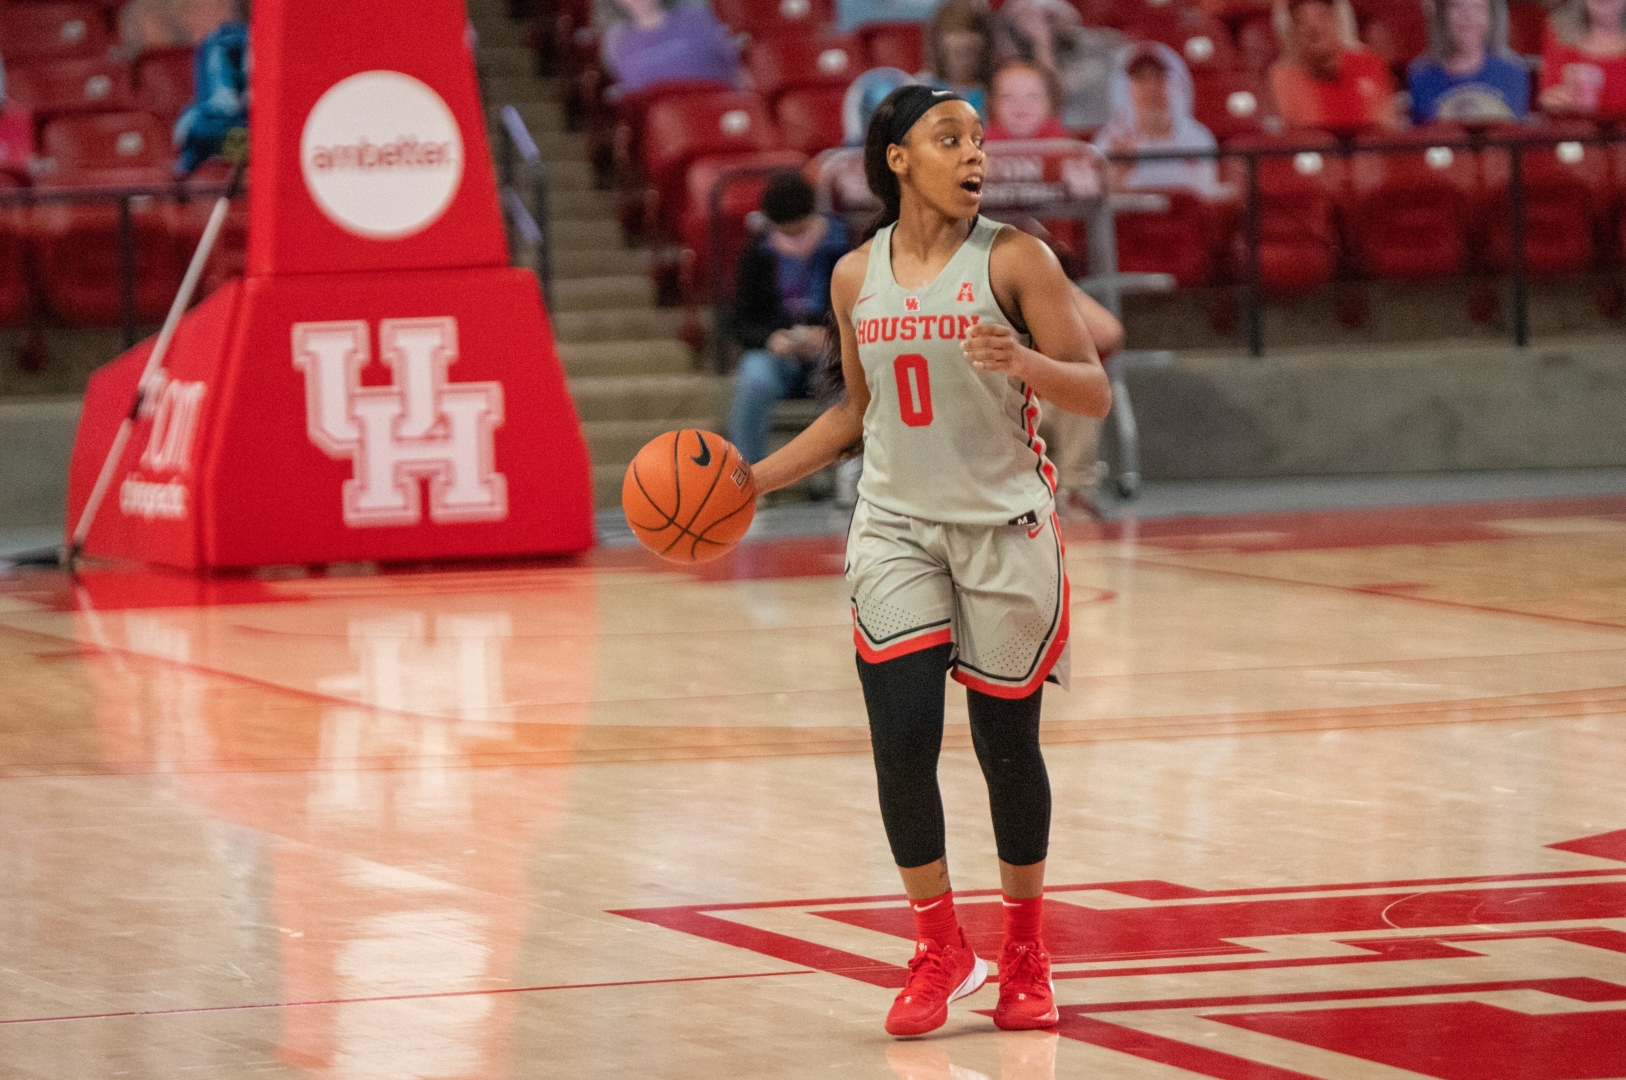 UH women's basketball guard Eryka Sidney brings the ball down the court in an earlier matchup against Wichita State. | Andy Yanez/The Cougar